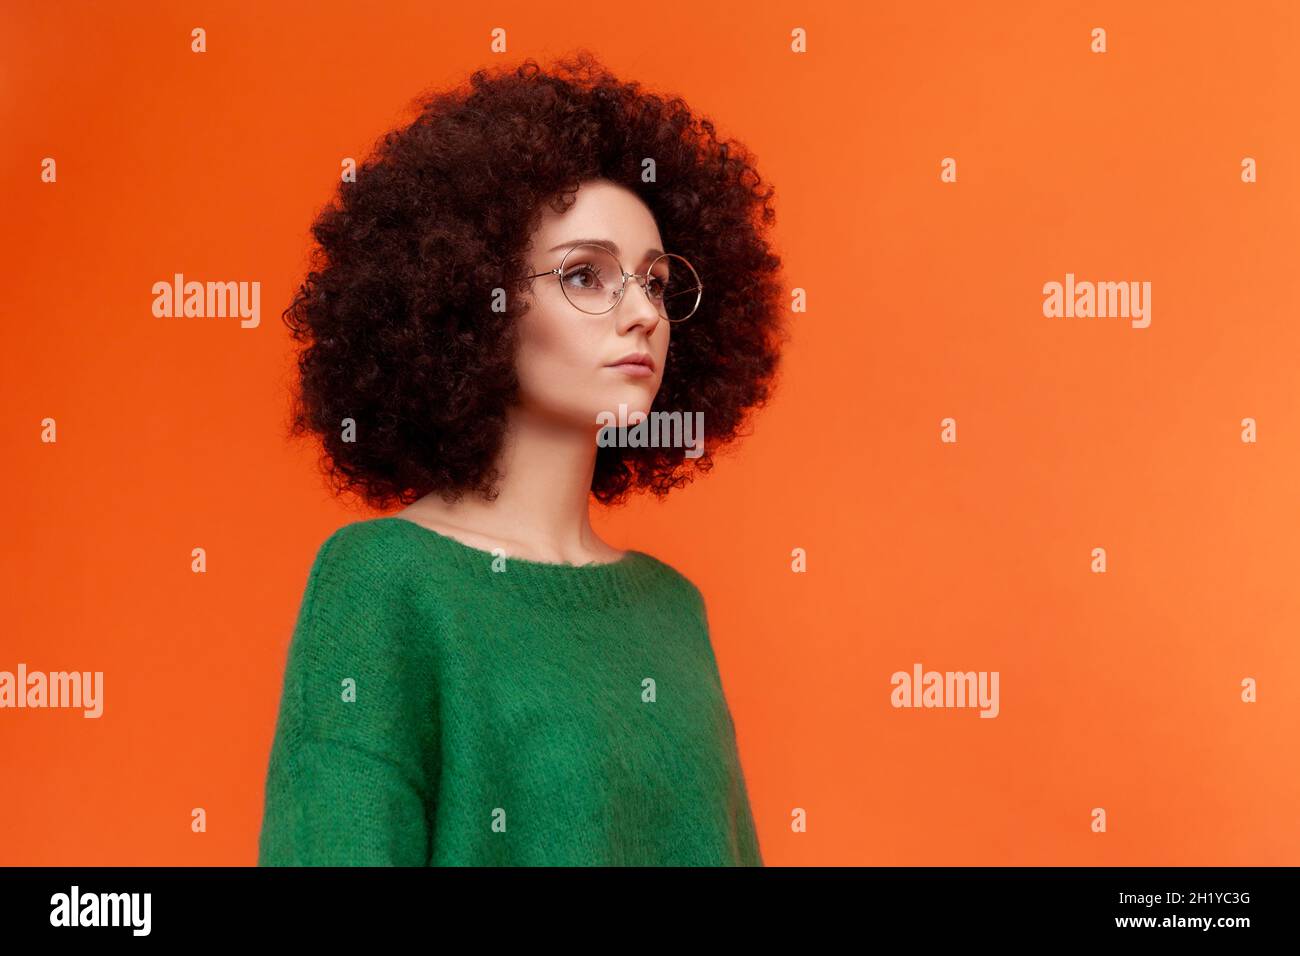 Profile portrait of good looking woman with Afro hairstyle wearing green casual style sweater and eyeglasses, looking away, serious expression. Indoor studio shot isolated on orange background. Stock Photo